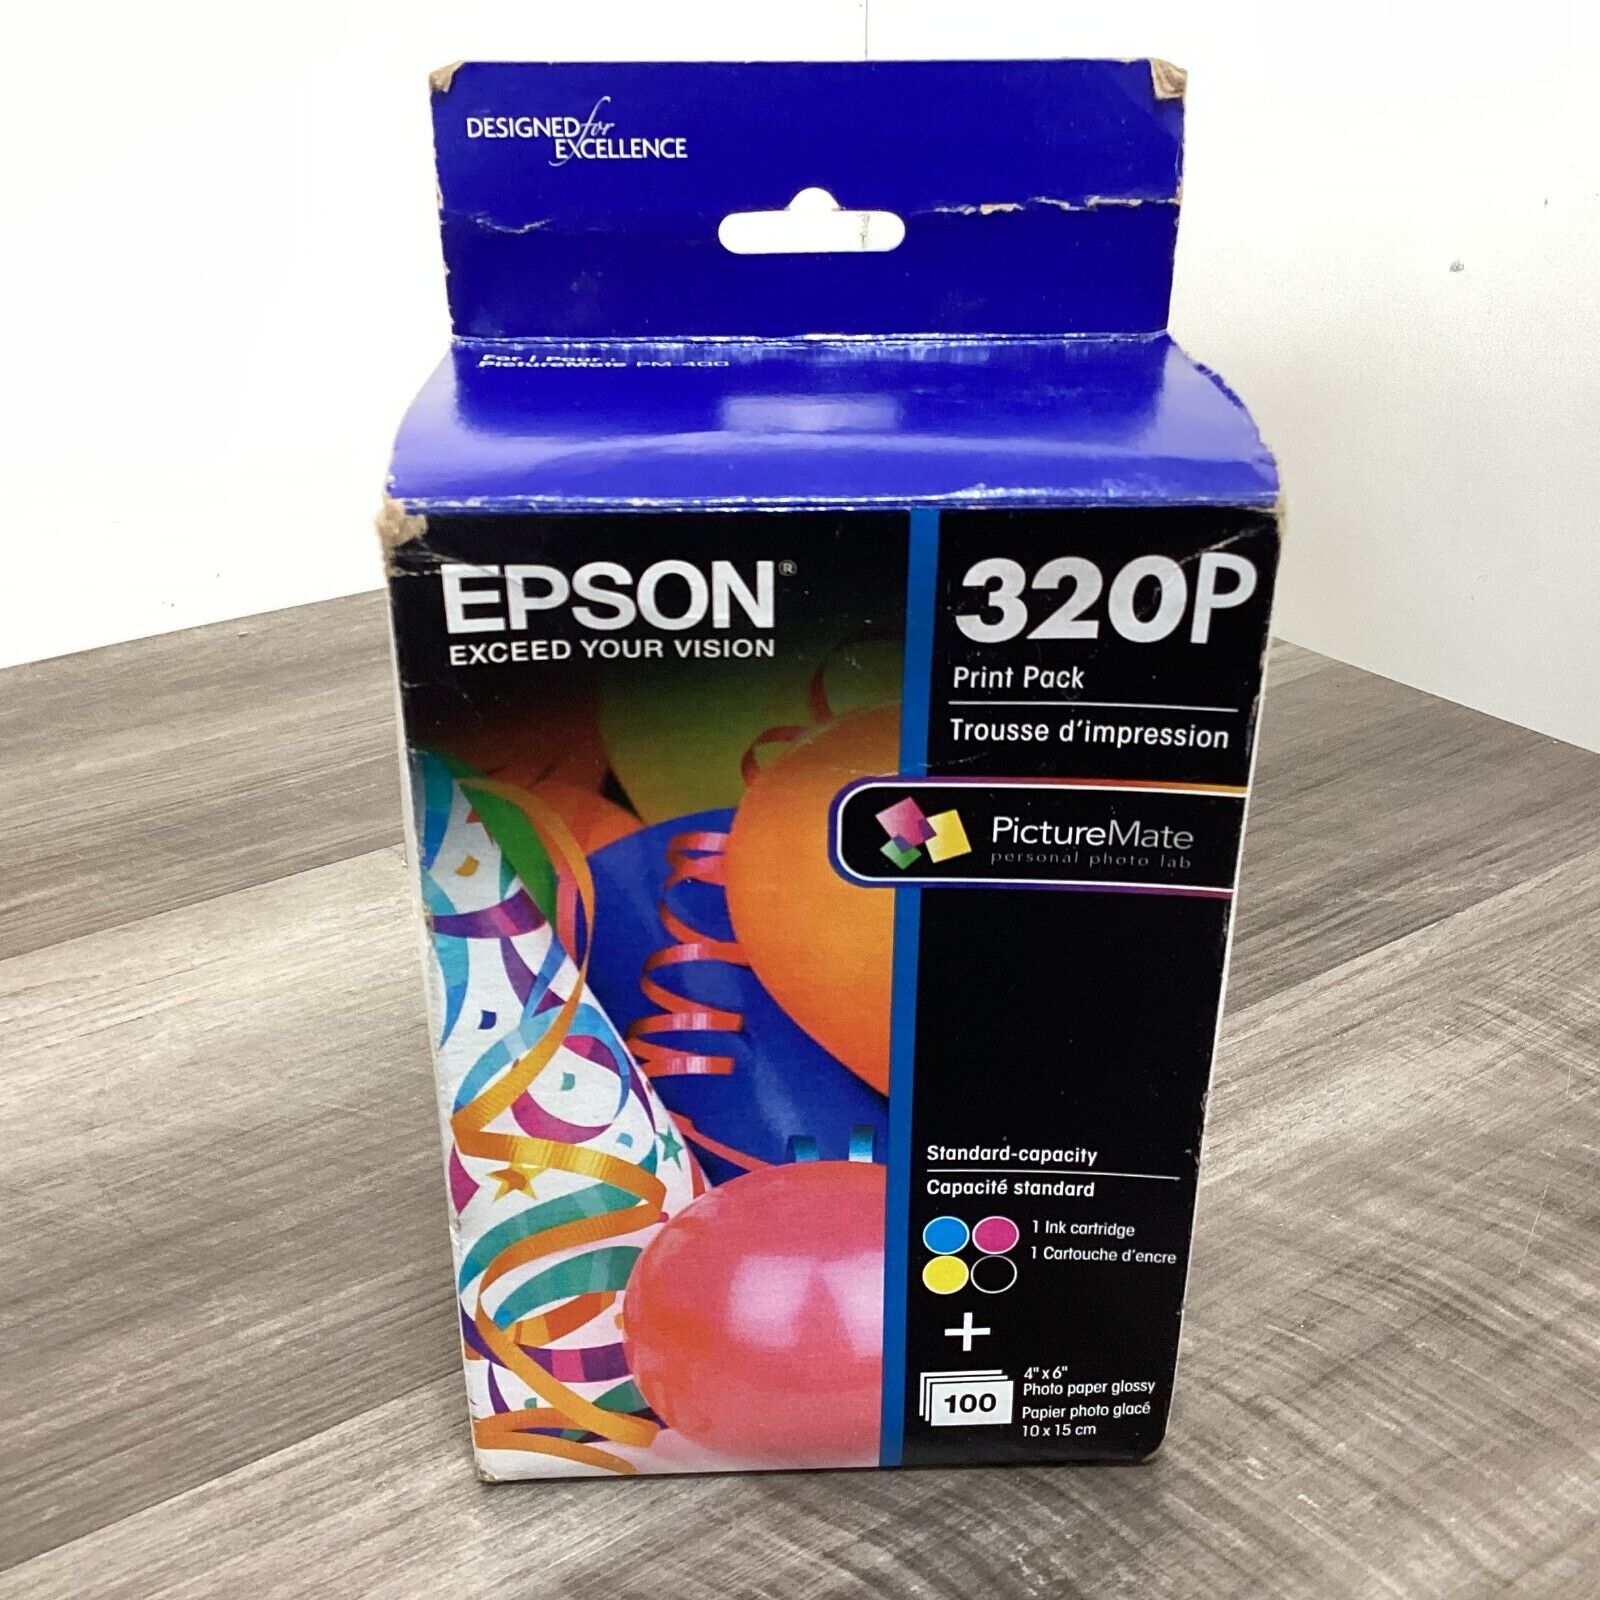 EPSON 320P PRINT PACK 1 CMYK INK CARTRIDGE 100 4x6 GLOSSY PHOTO PAPER FOR PM-400